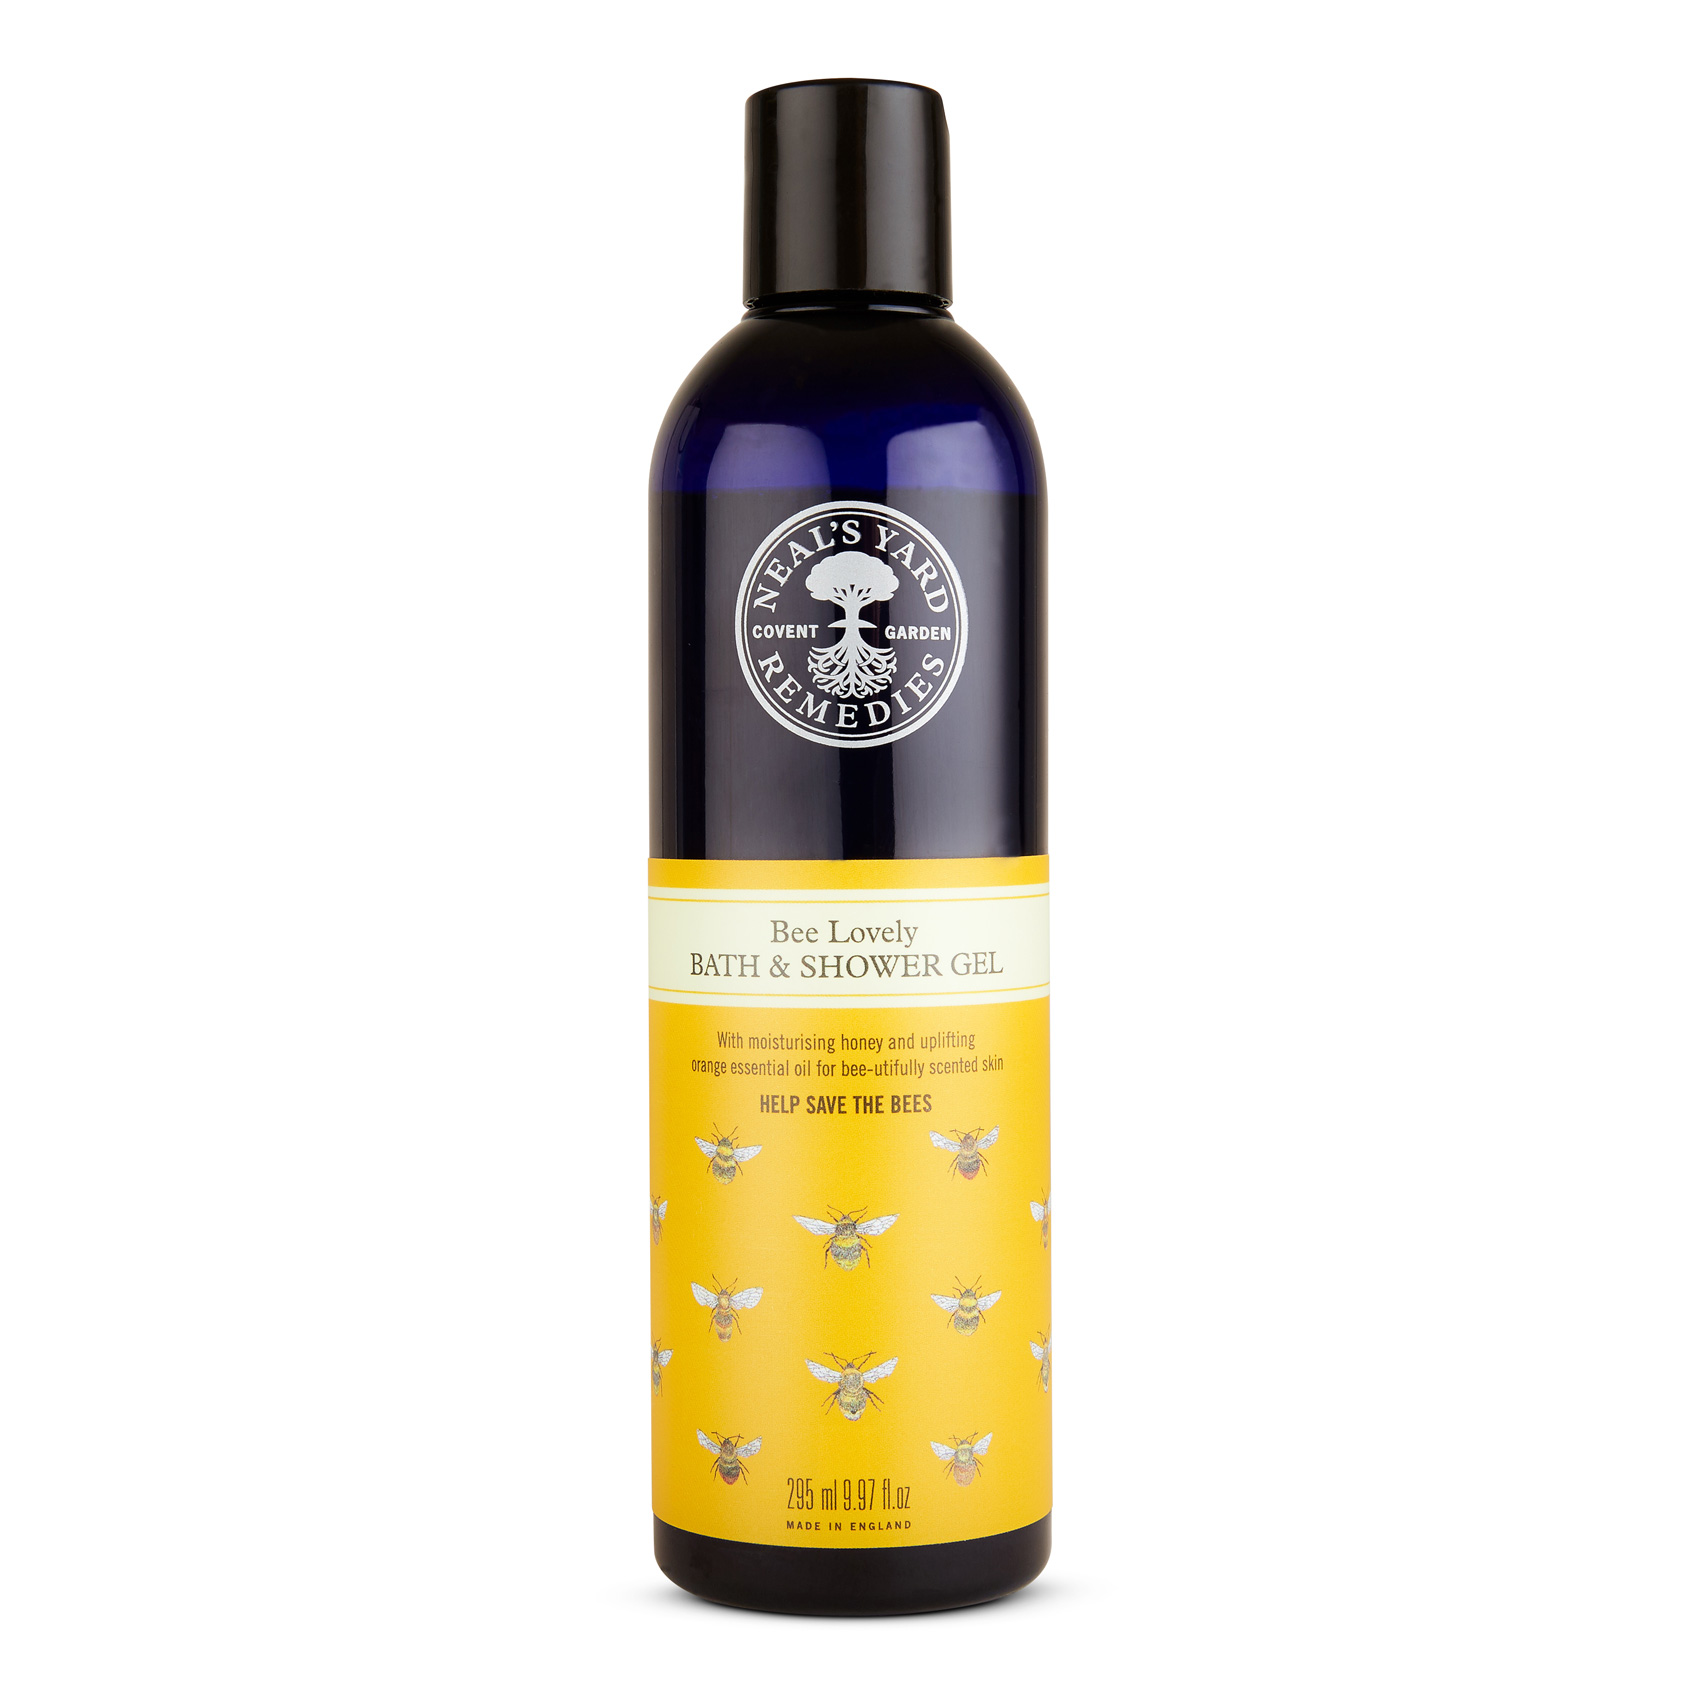 Neal's Yard Remedies Bee Lovely Bath and Shower Gel 295ml